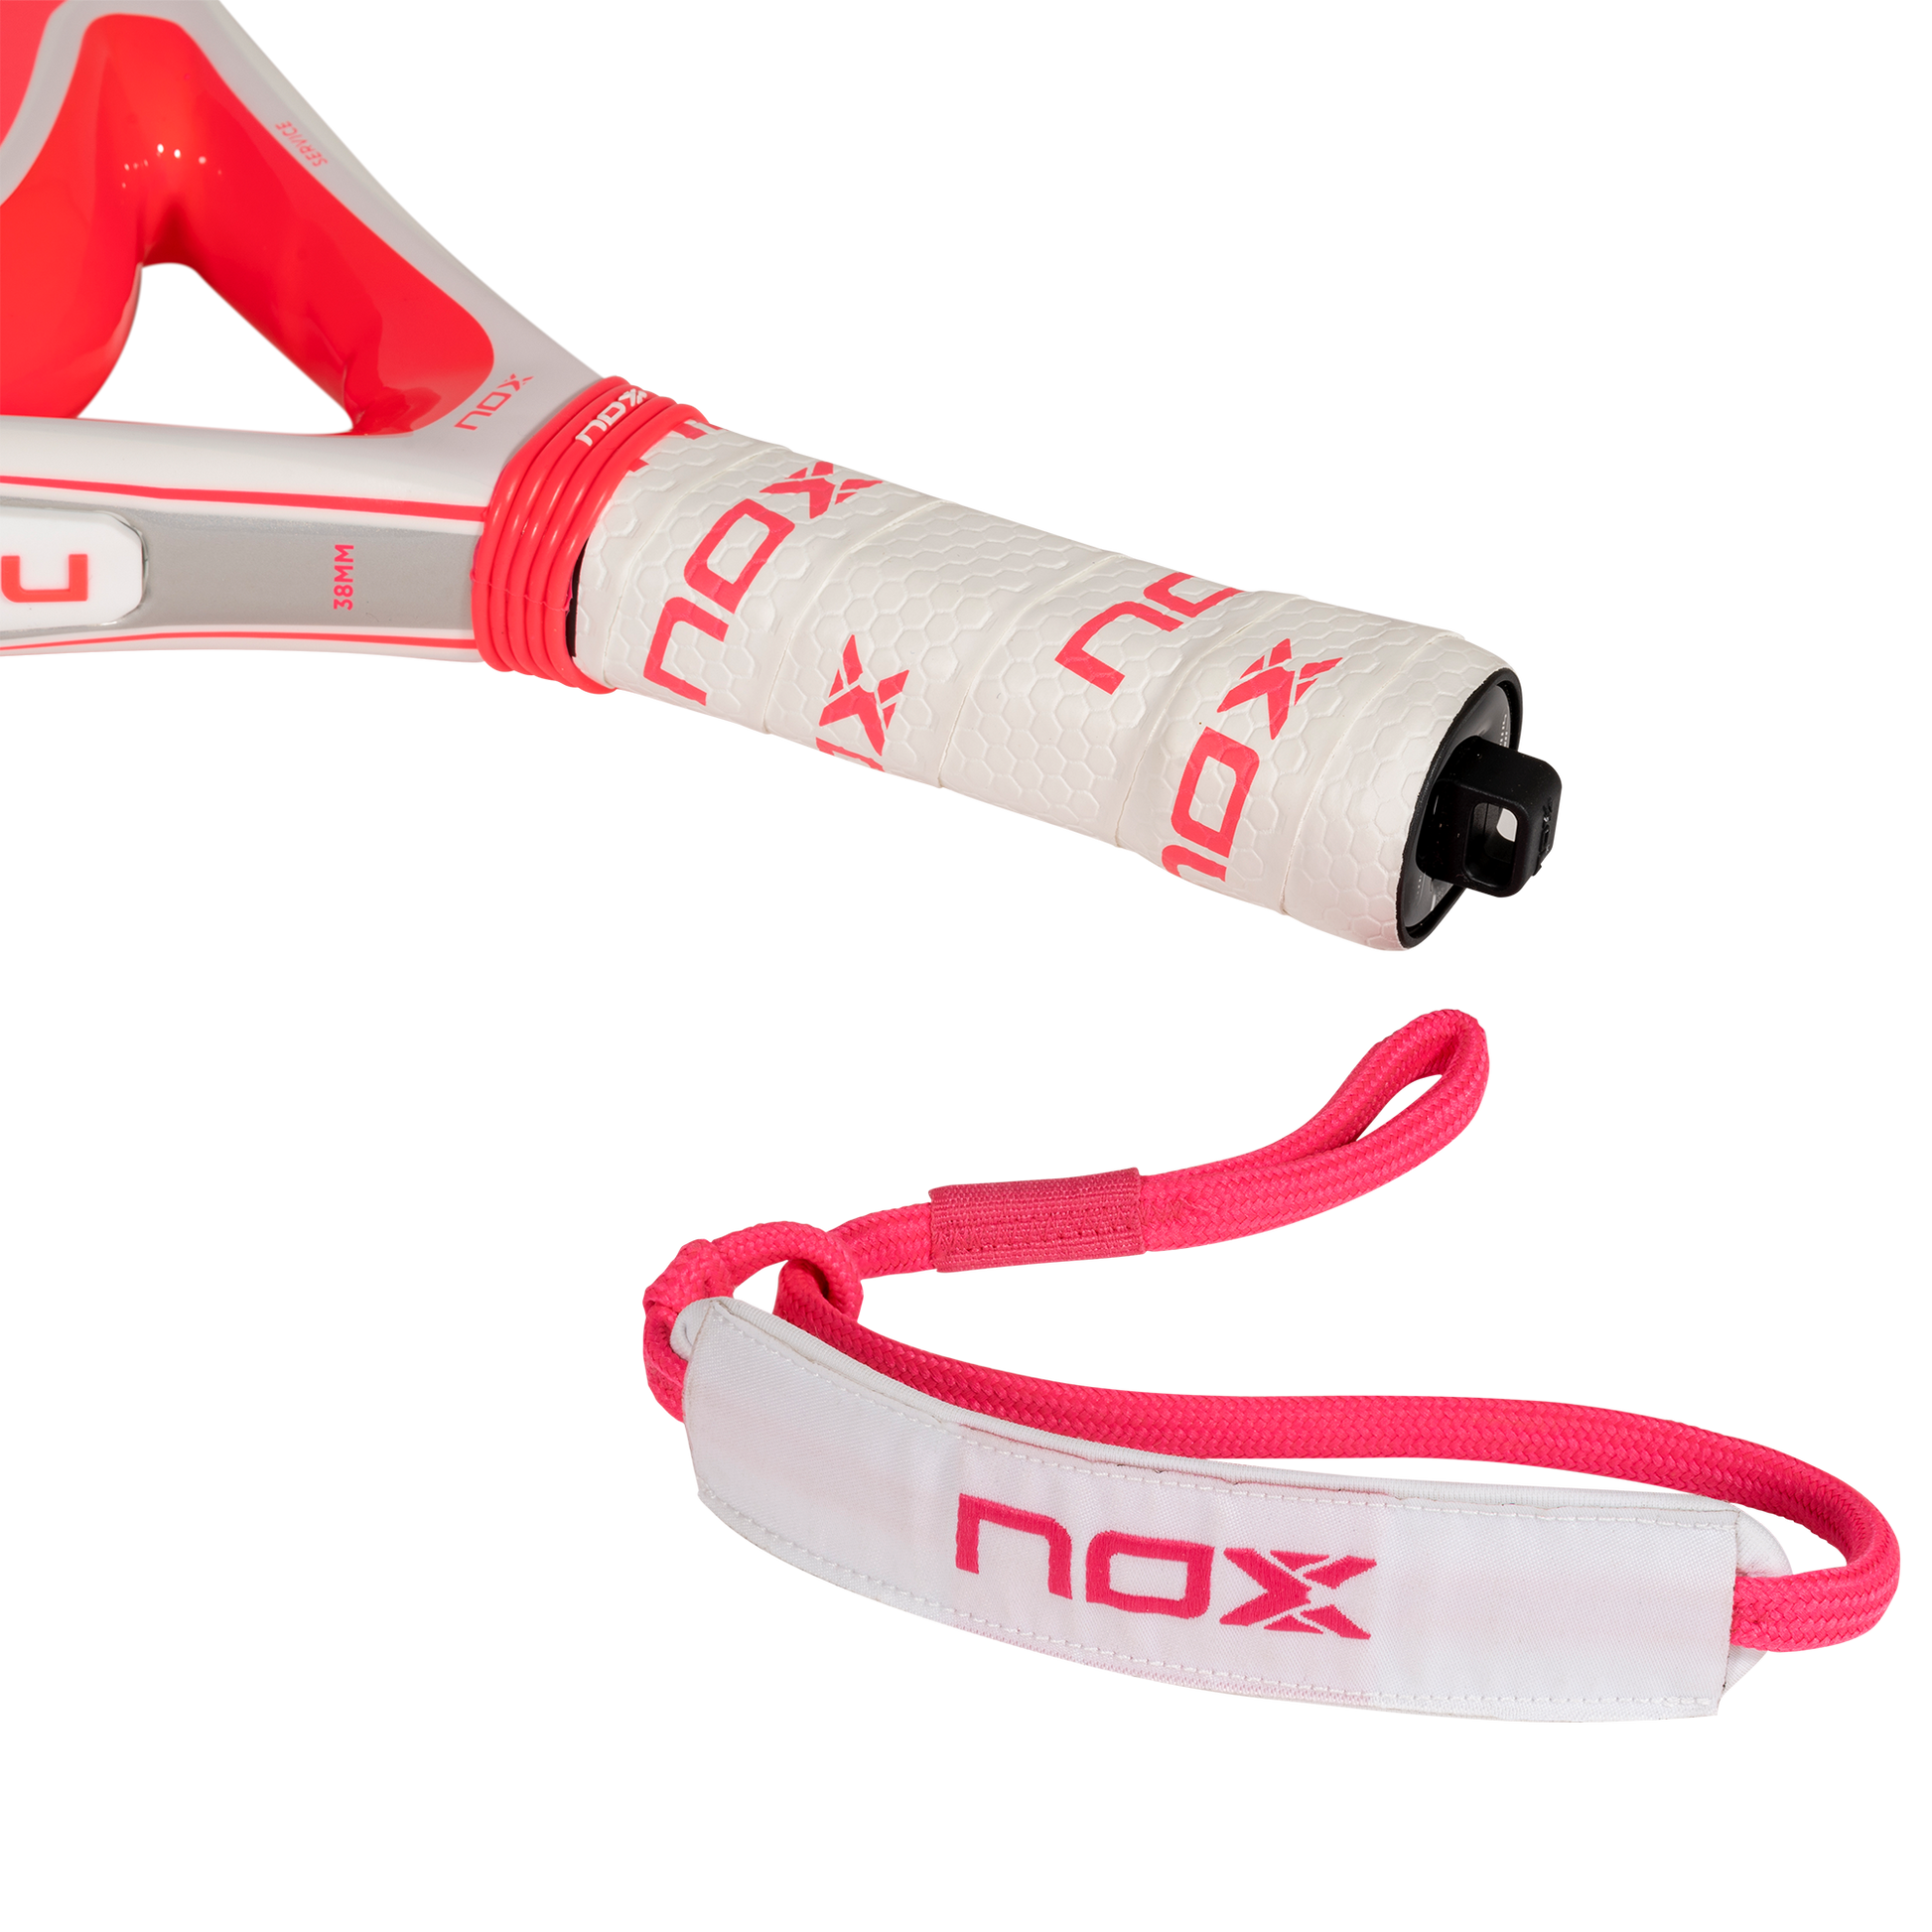 the smartstrap of the Nox Equation Lady Light Advanced padel racket 2024 on sale at thepadelshop.co.nz